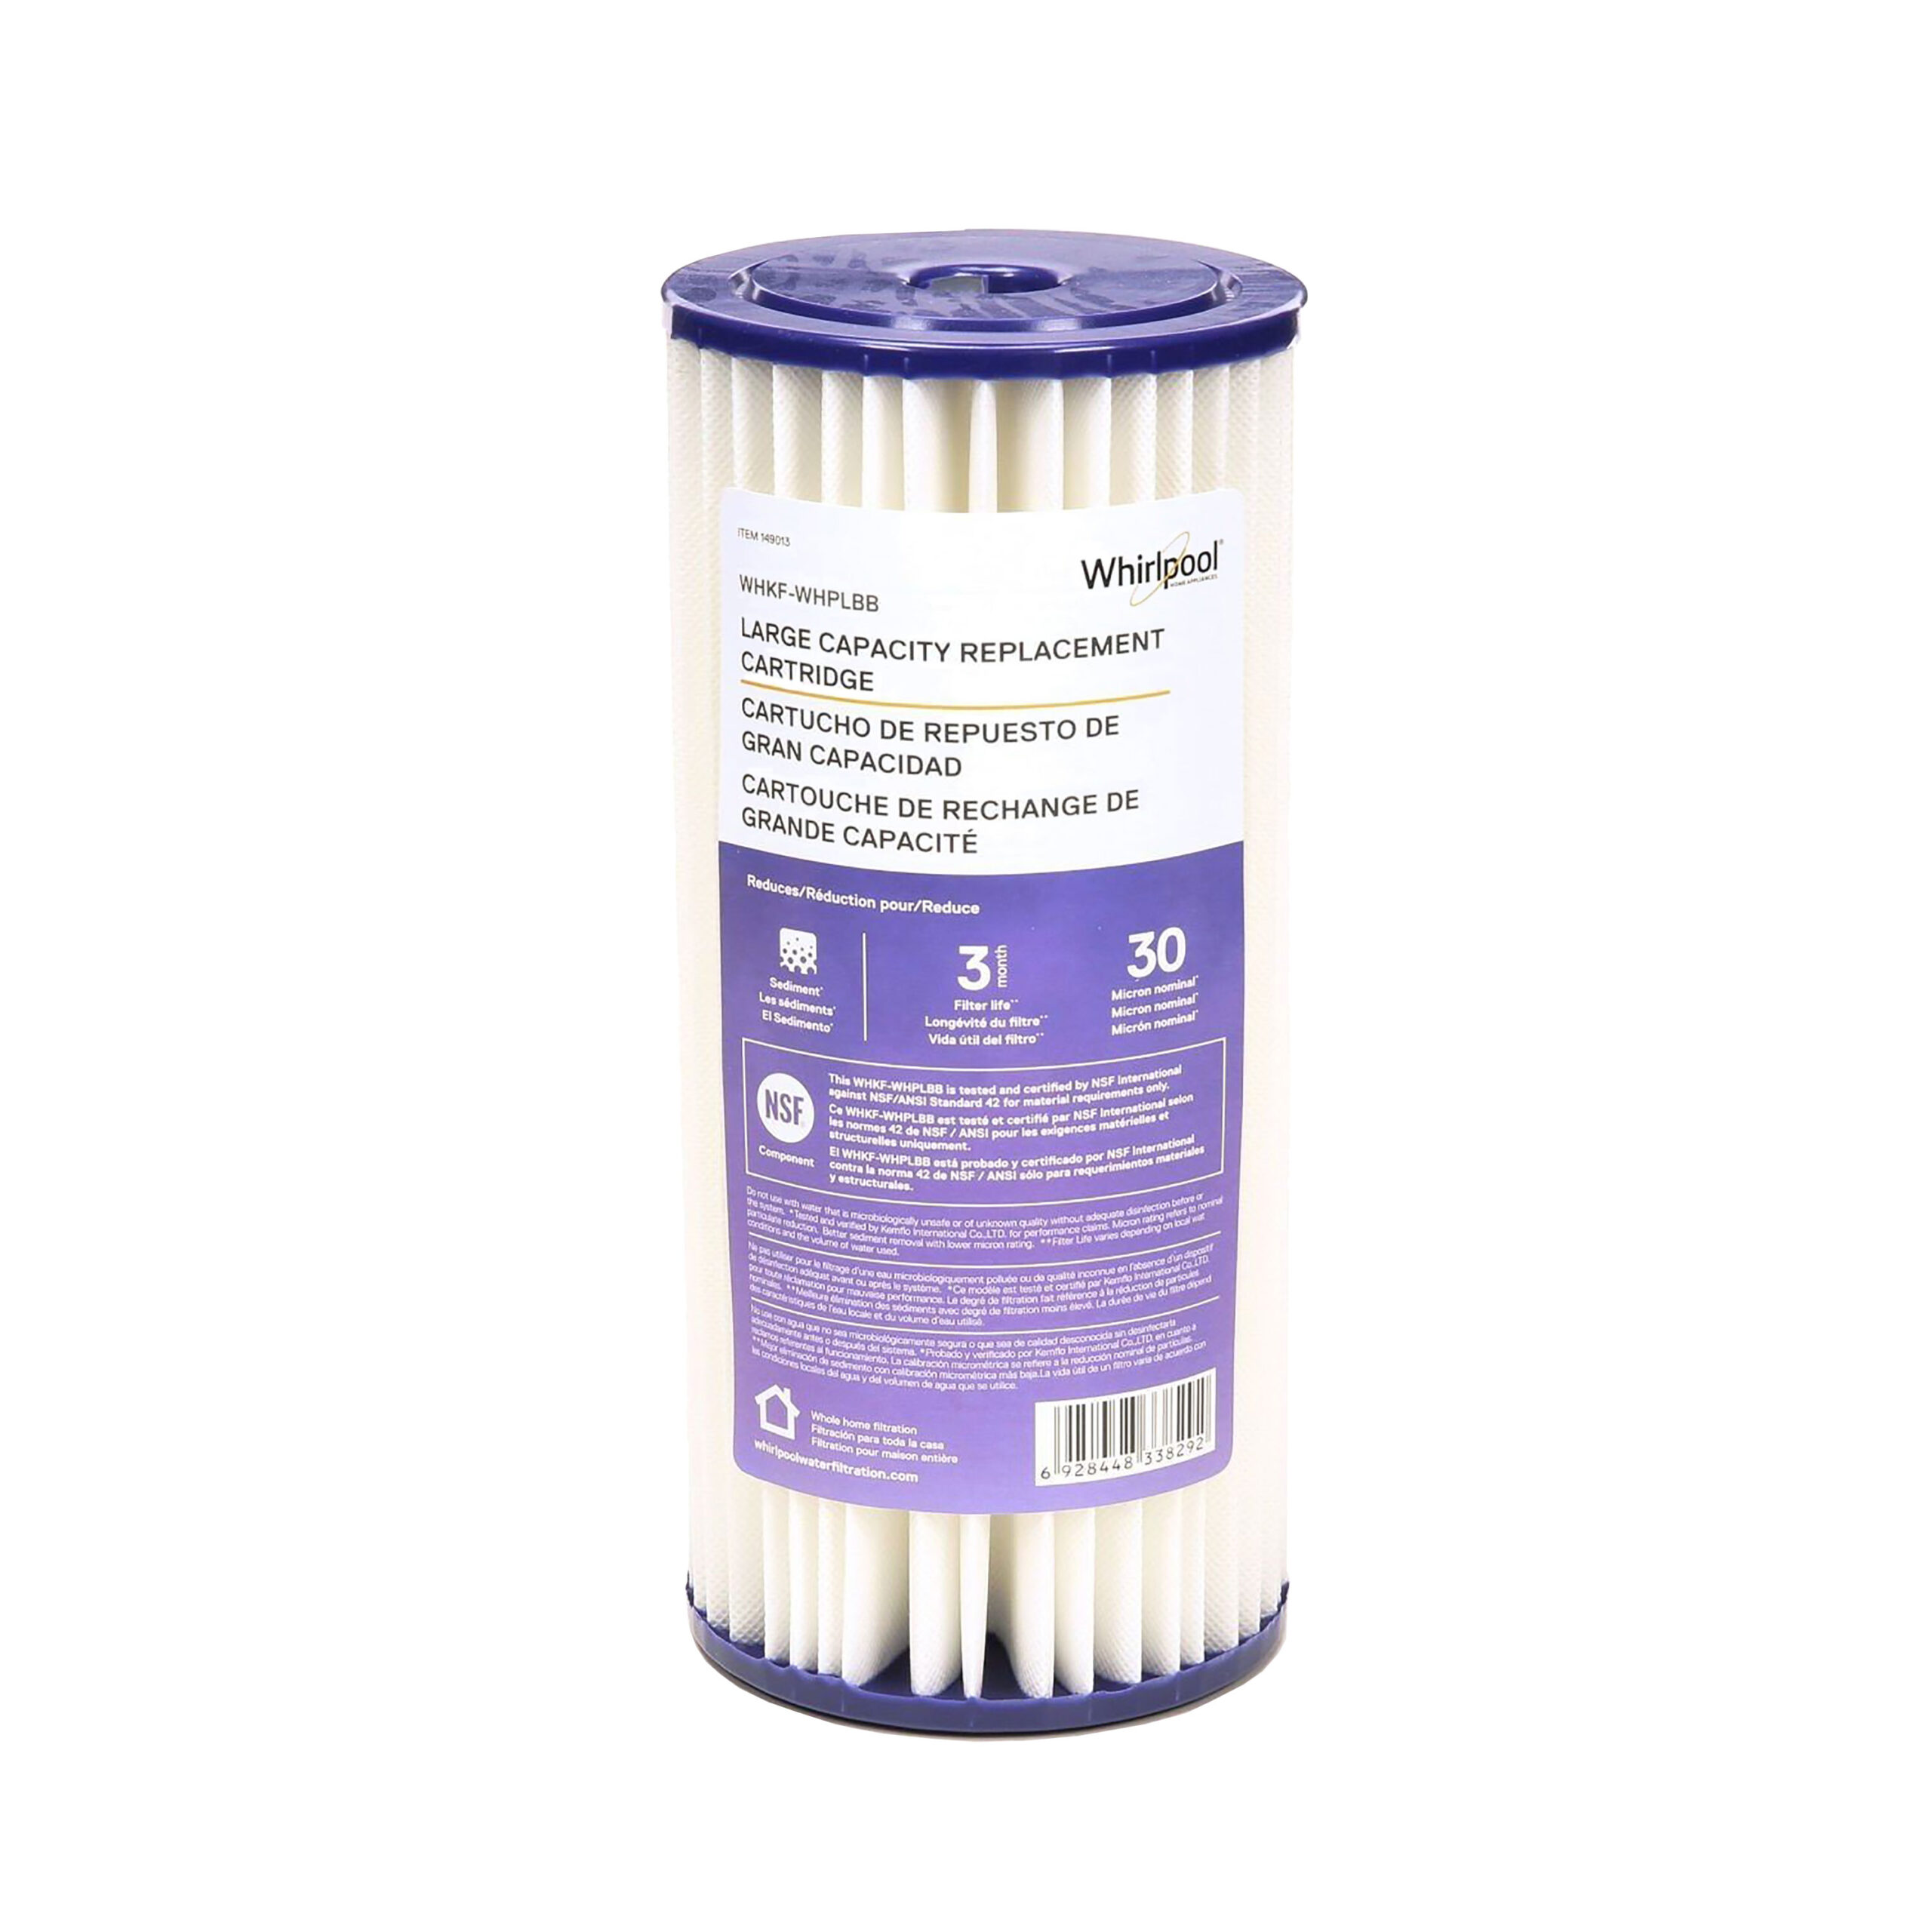 Whirlpool WHKF-WHPLBB Whole Home Large Capacity Pleated Filter -1 pk -  Whirlpool® Water Filtration